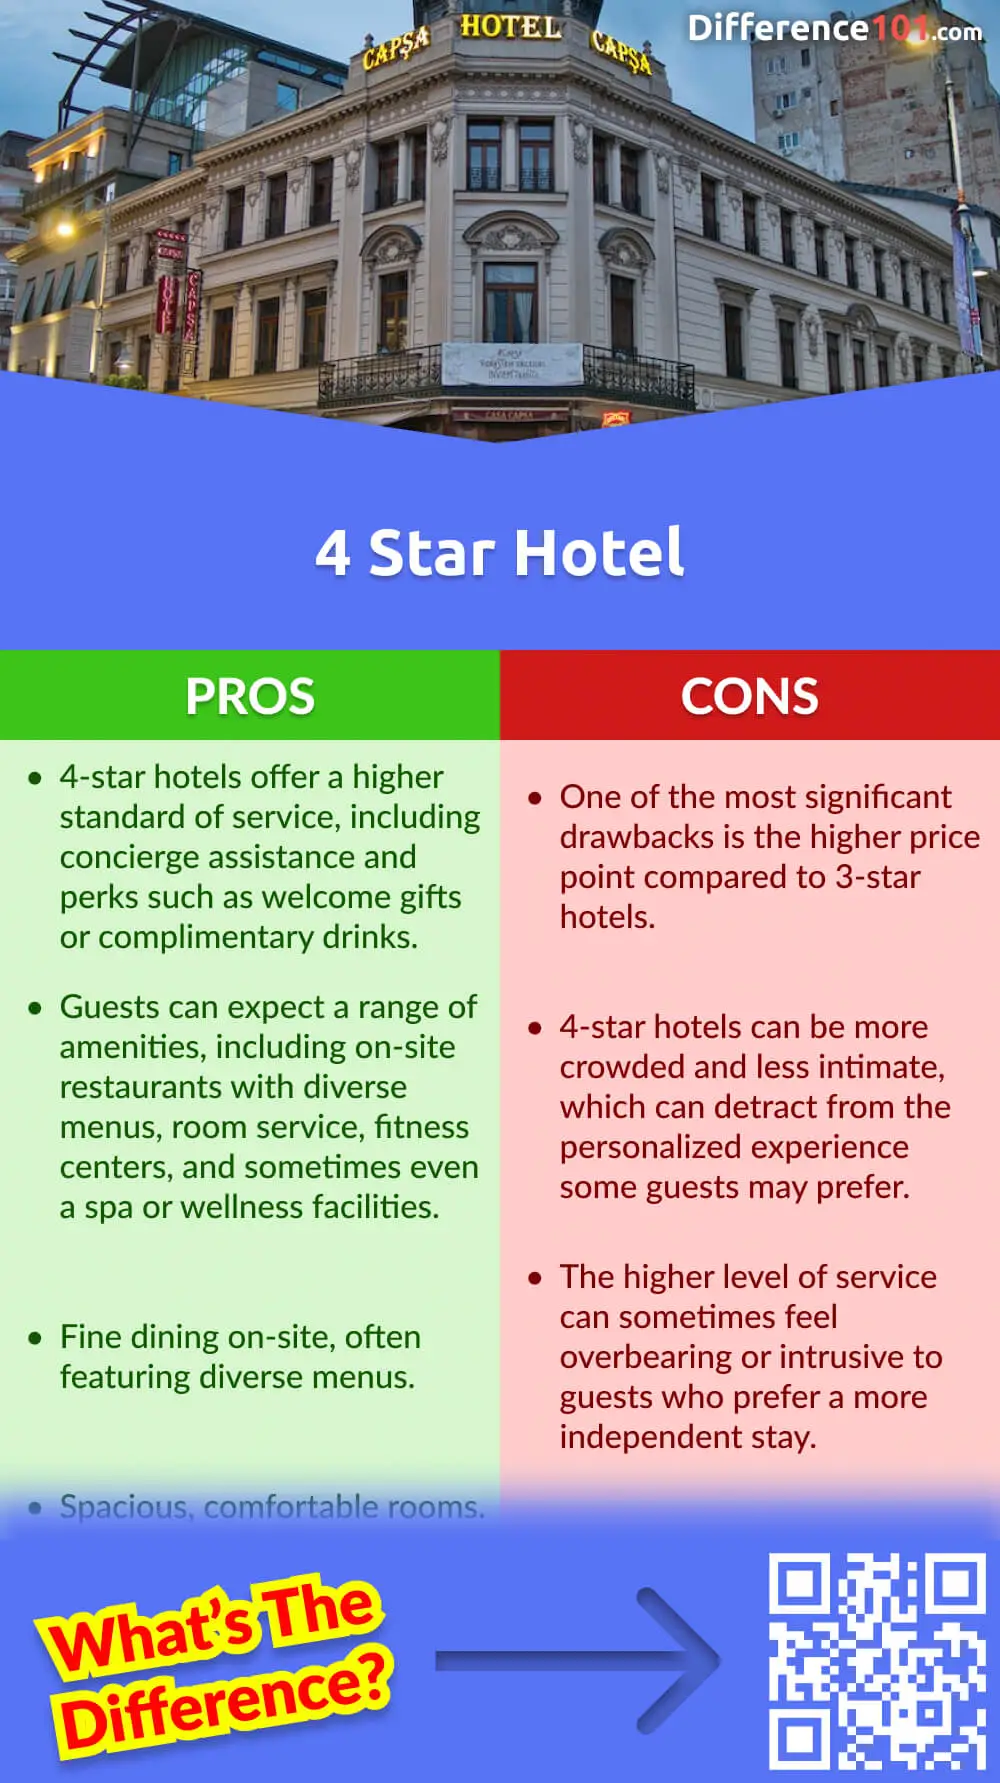 4 Star Hotel Pros & Cons
